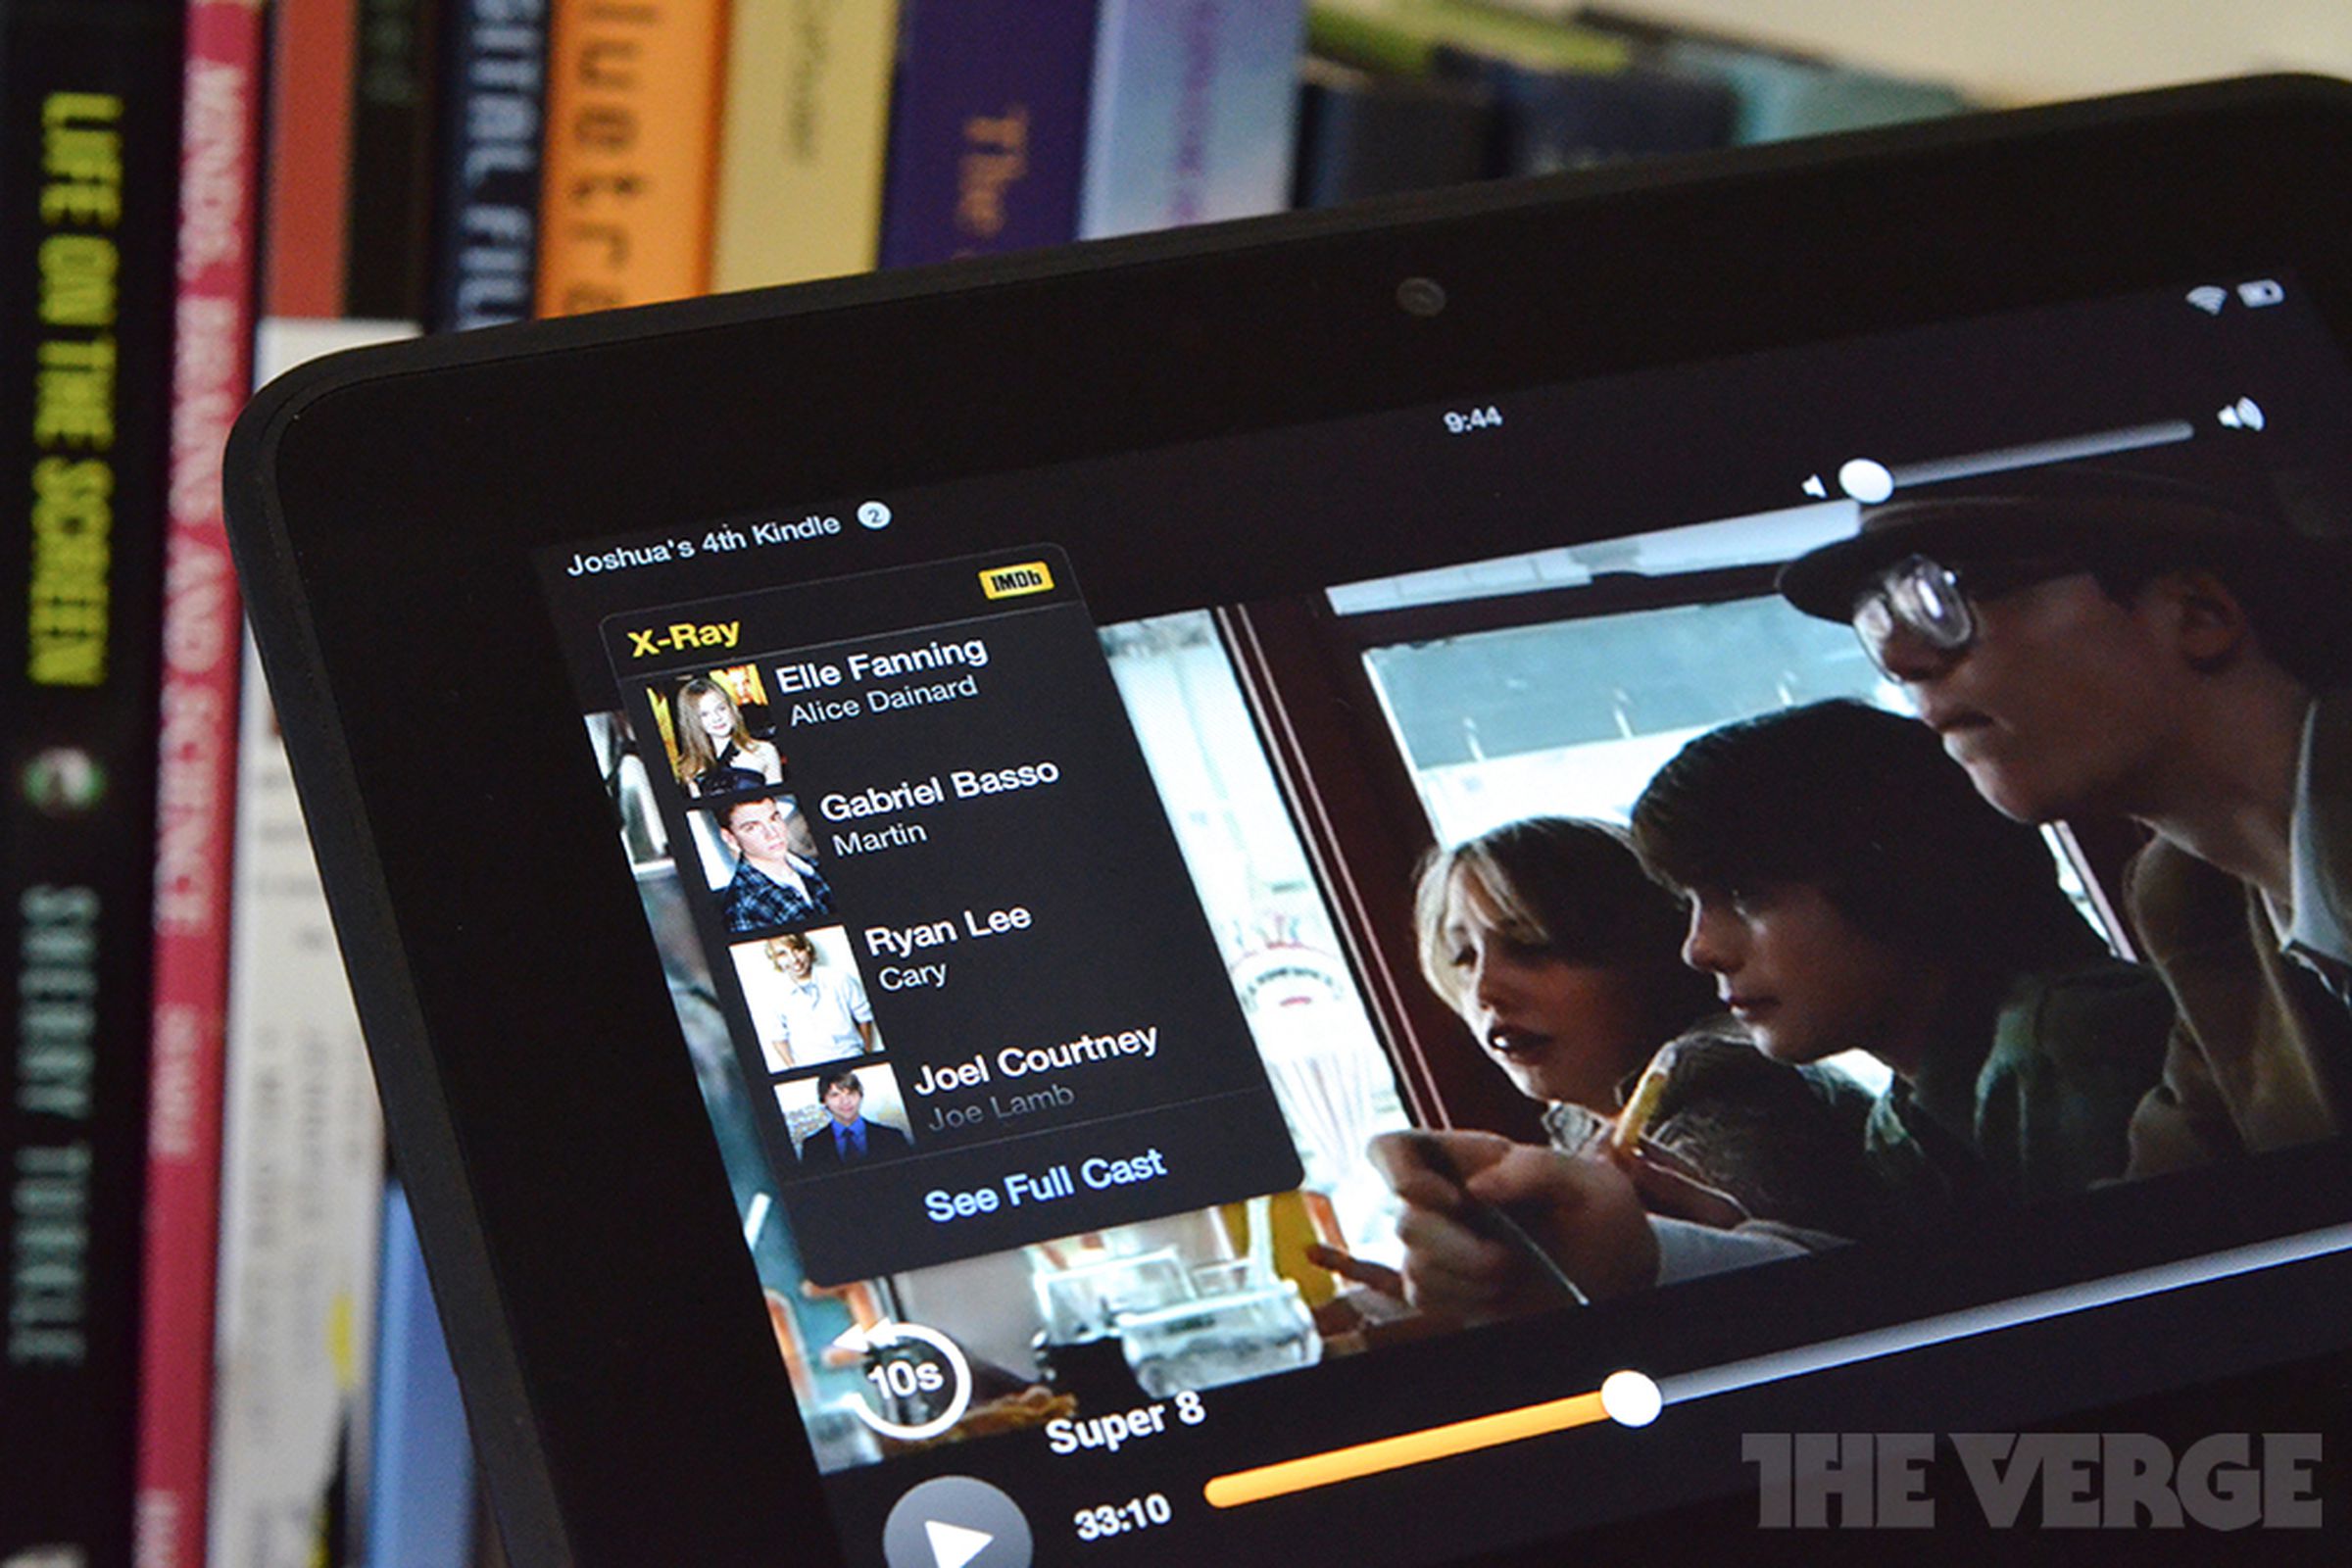 Amazon Kindle Fire HD X-Ray for movies